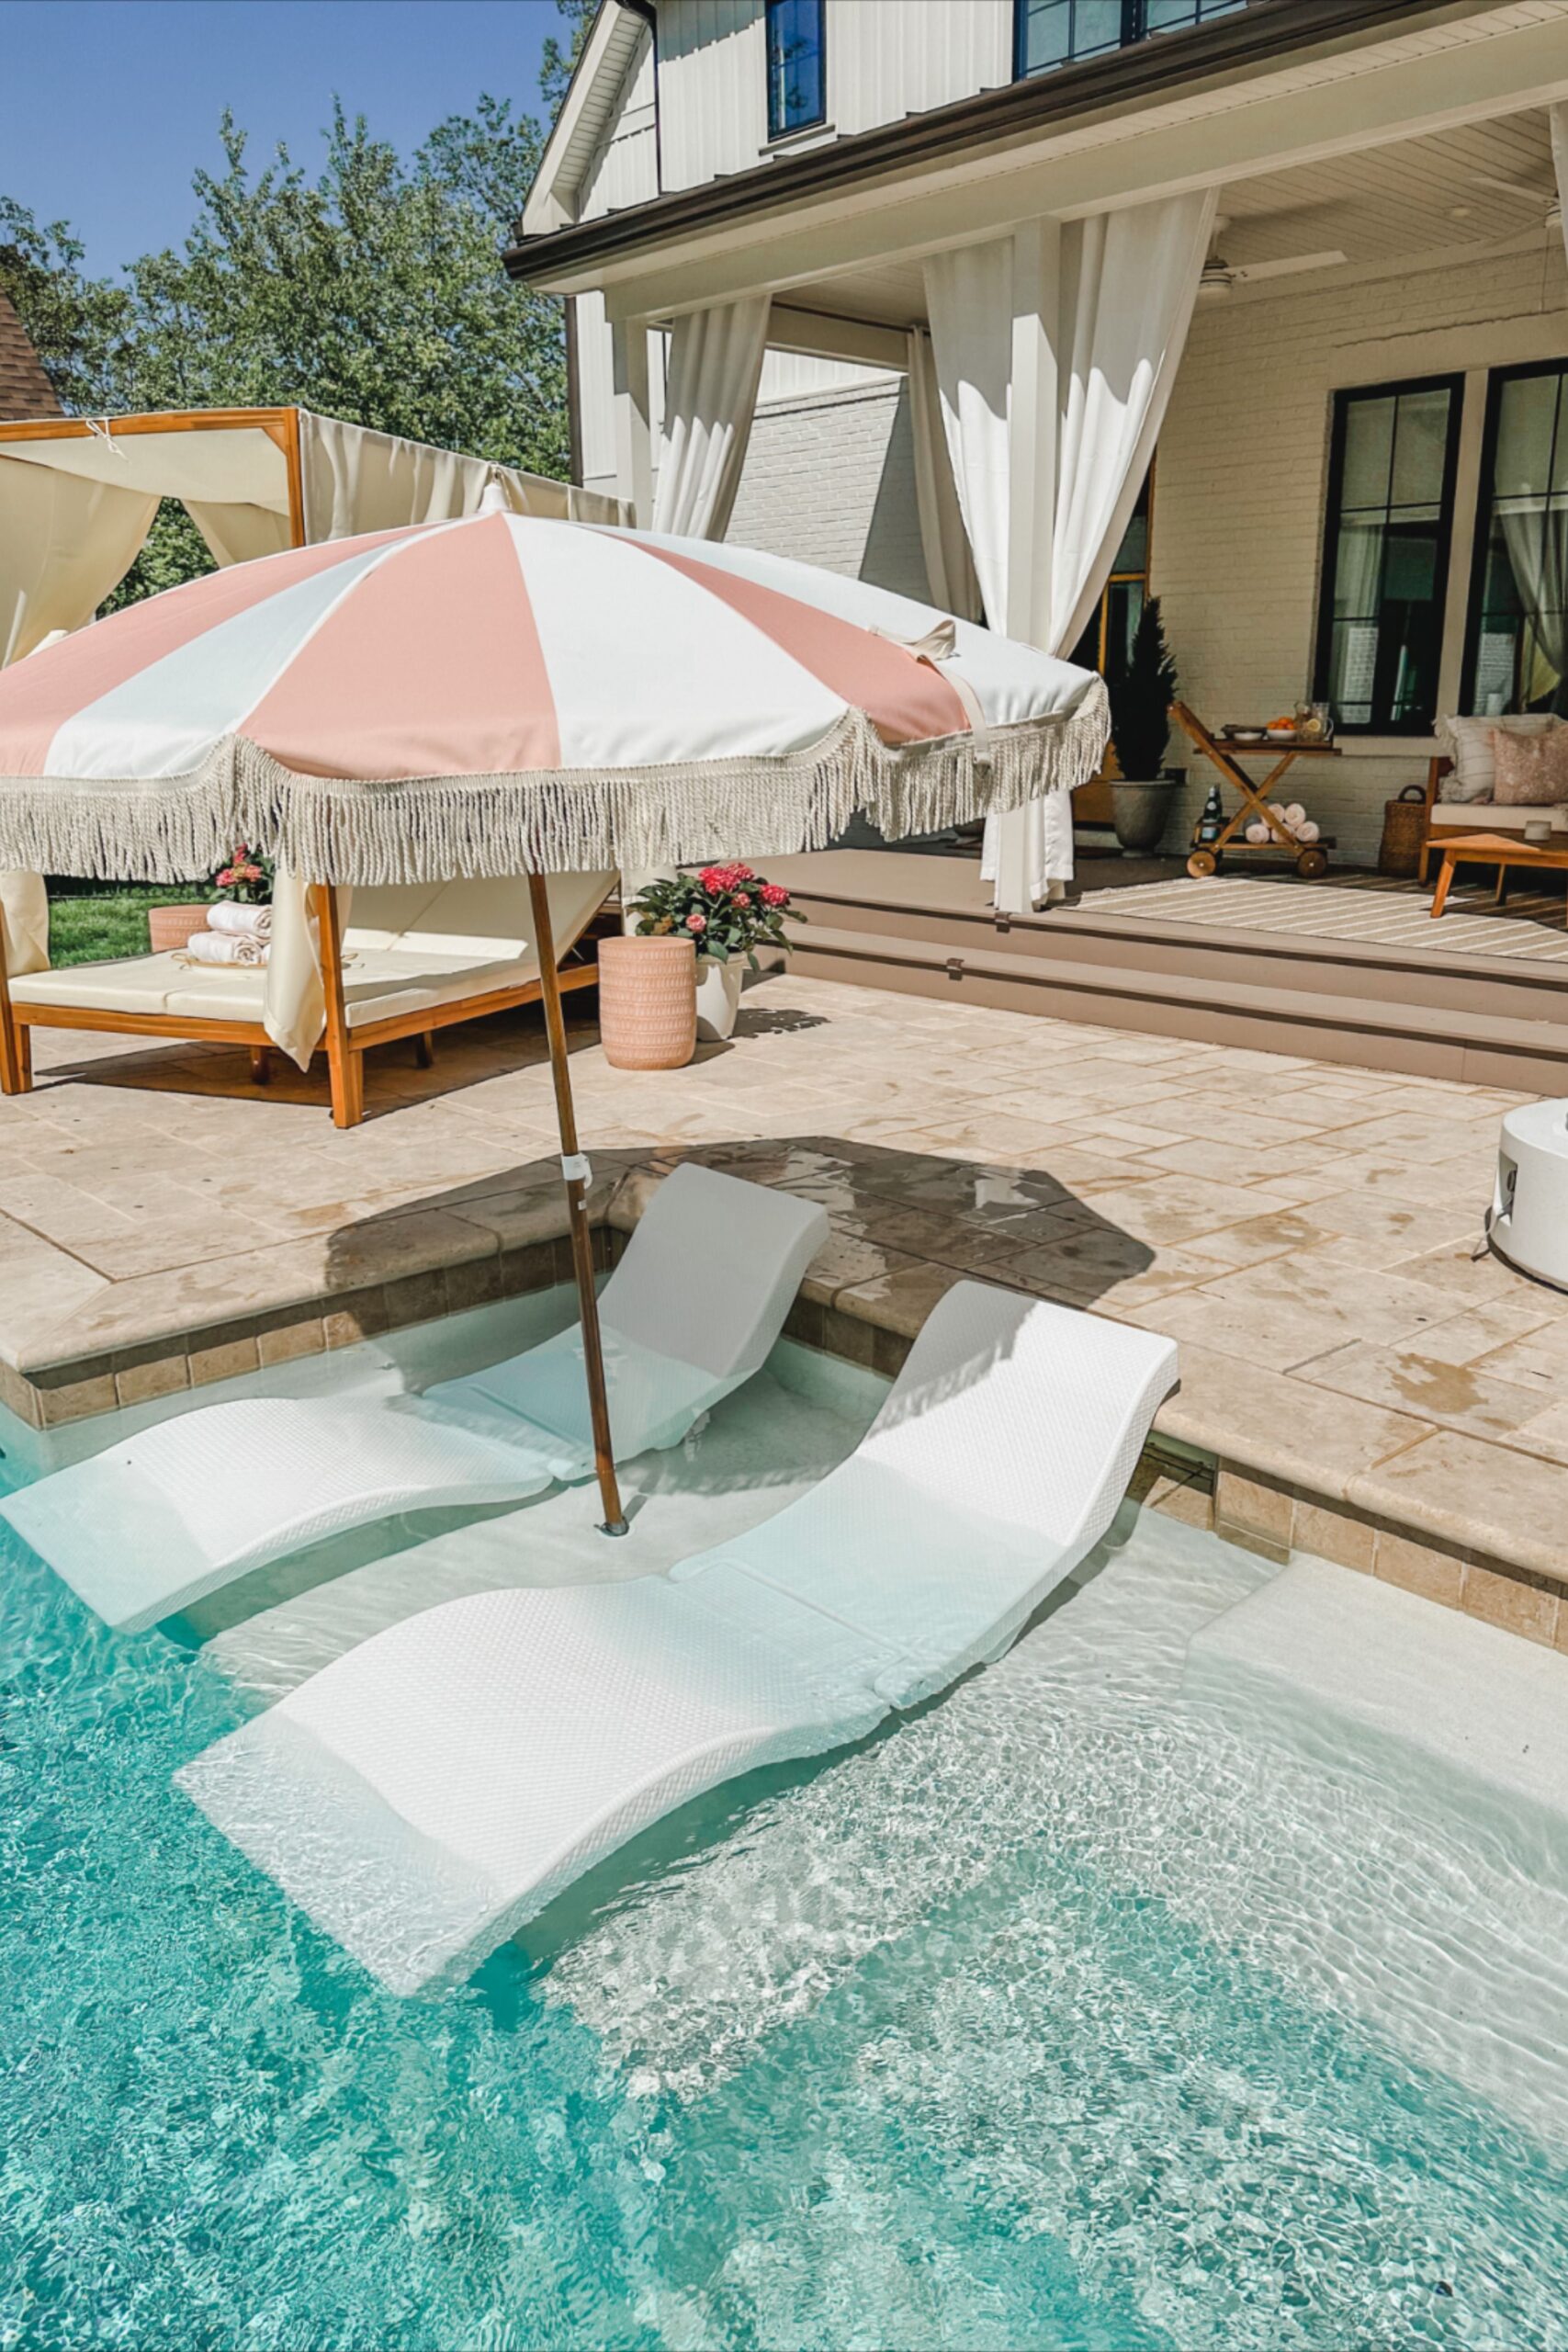 Lounge in Style with Pool Chairs